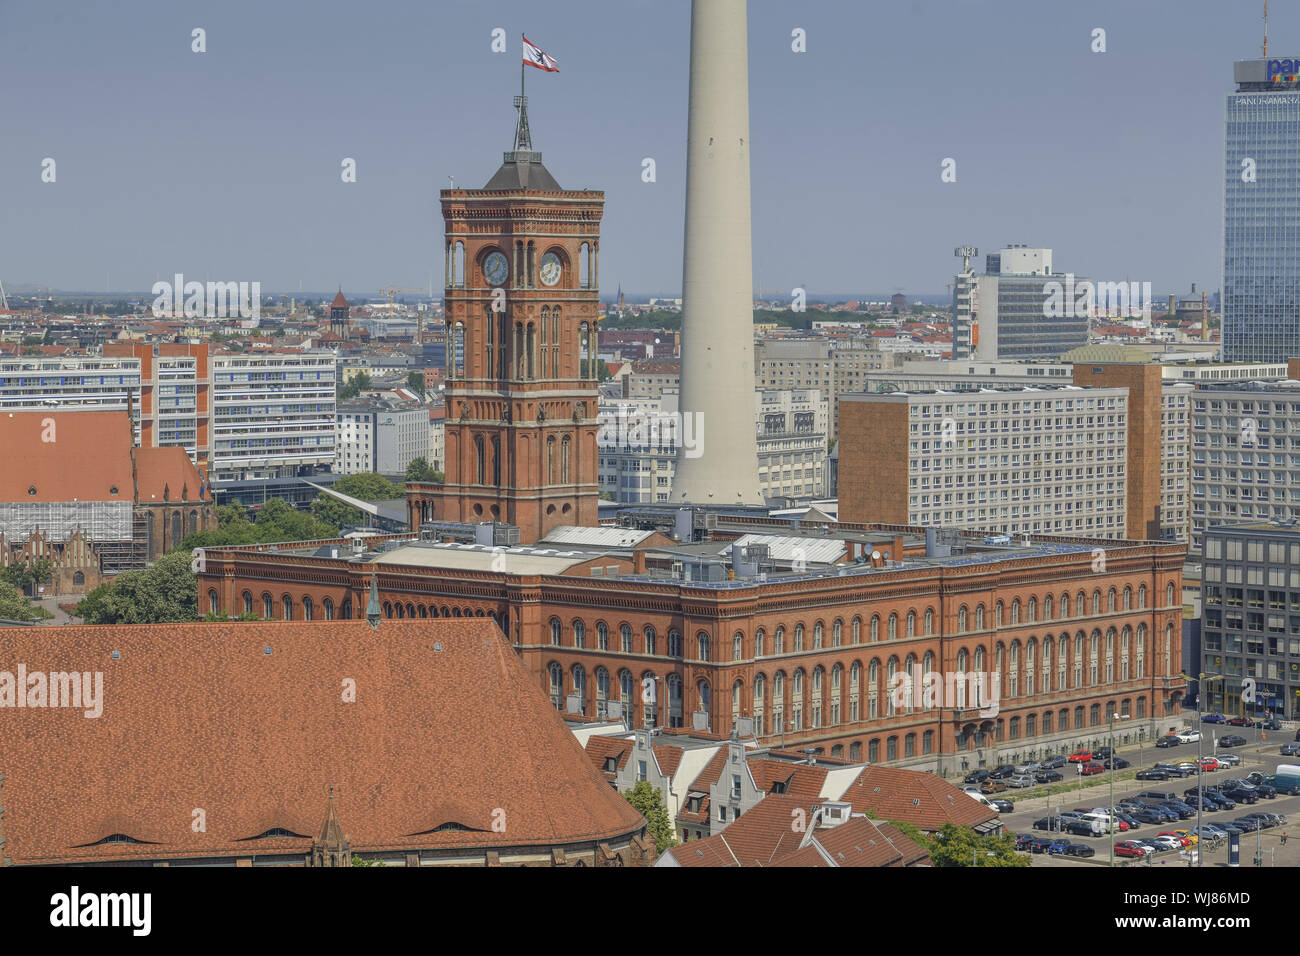 View, architecture, Outside, Outside, outside view, outside view, Berlin, Berlin city hall, Berlin middle, Germany, building, building, middle, city h Stock Photo